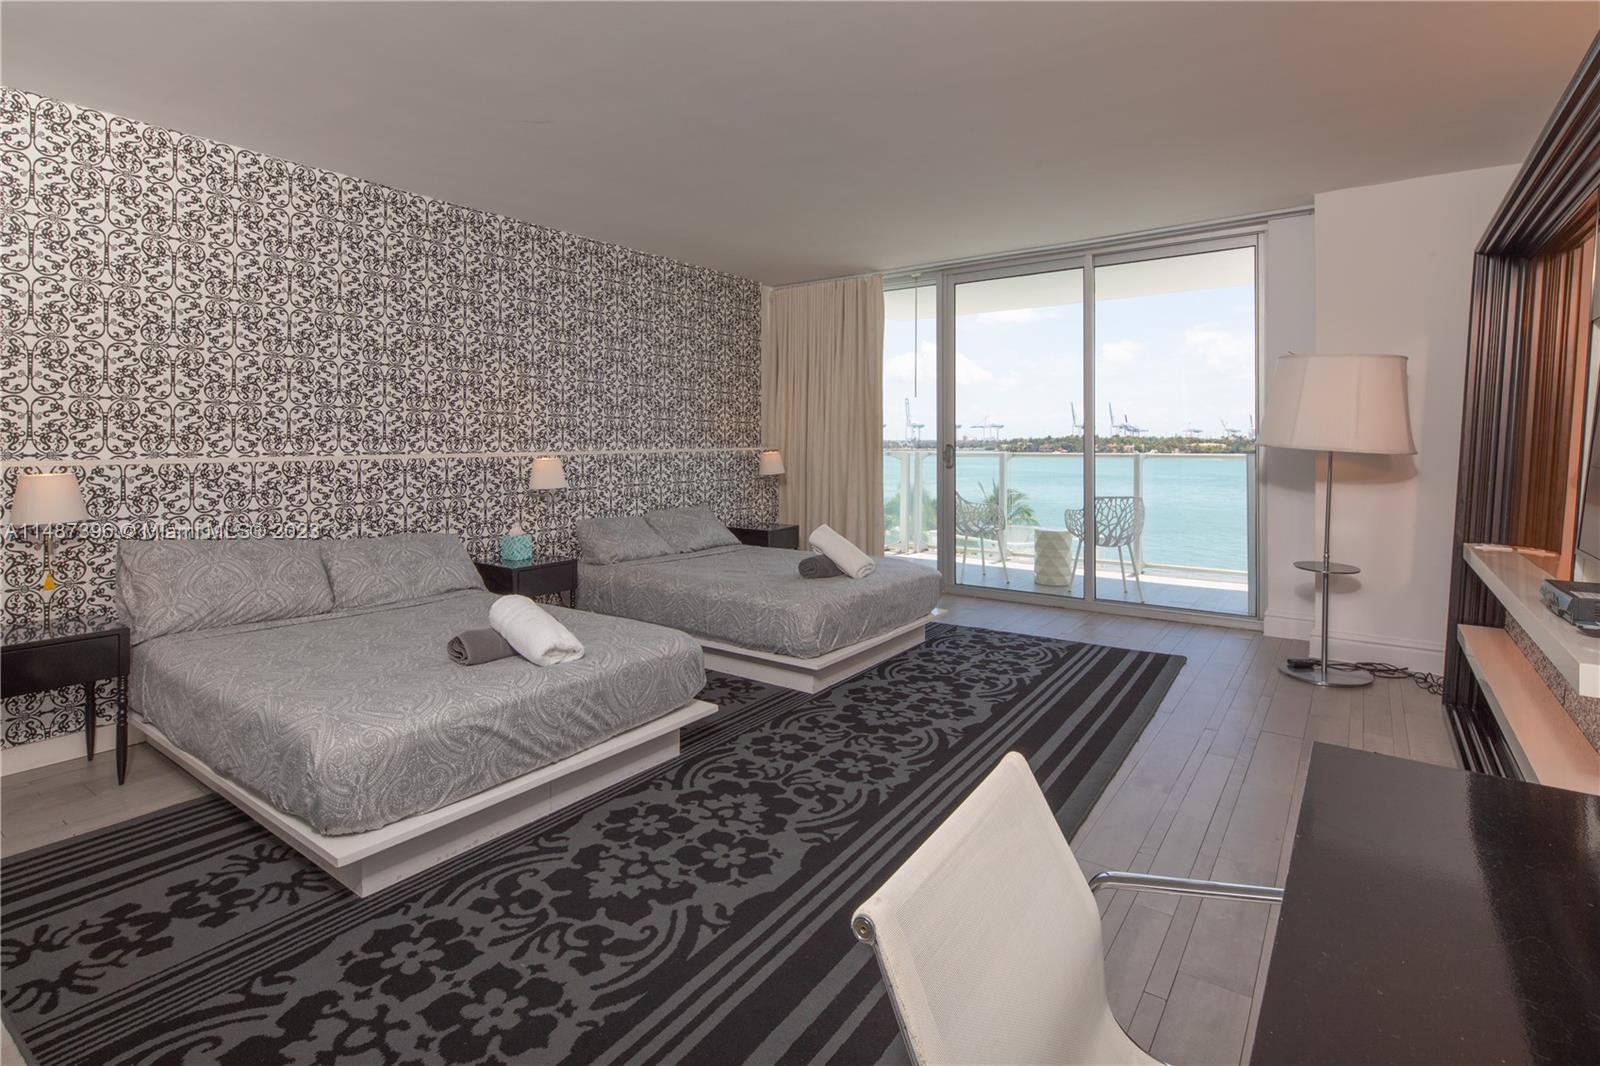 This beautiful studio at the Mondrian South Beach offers an amazing direct view of the bay from the balcony.
Short term rentals are allowed and the unit is currently not in the hotel program.
Beautiful pool with bar and restaurant, gym and spa are among the services available for owners and guests.